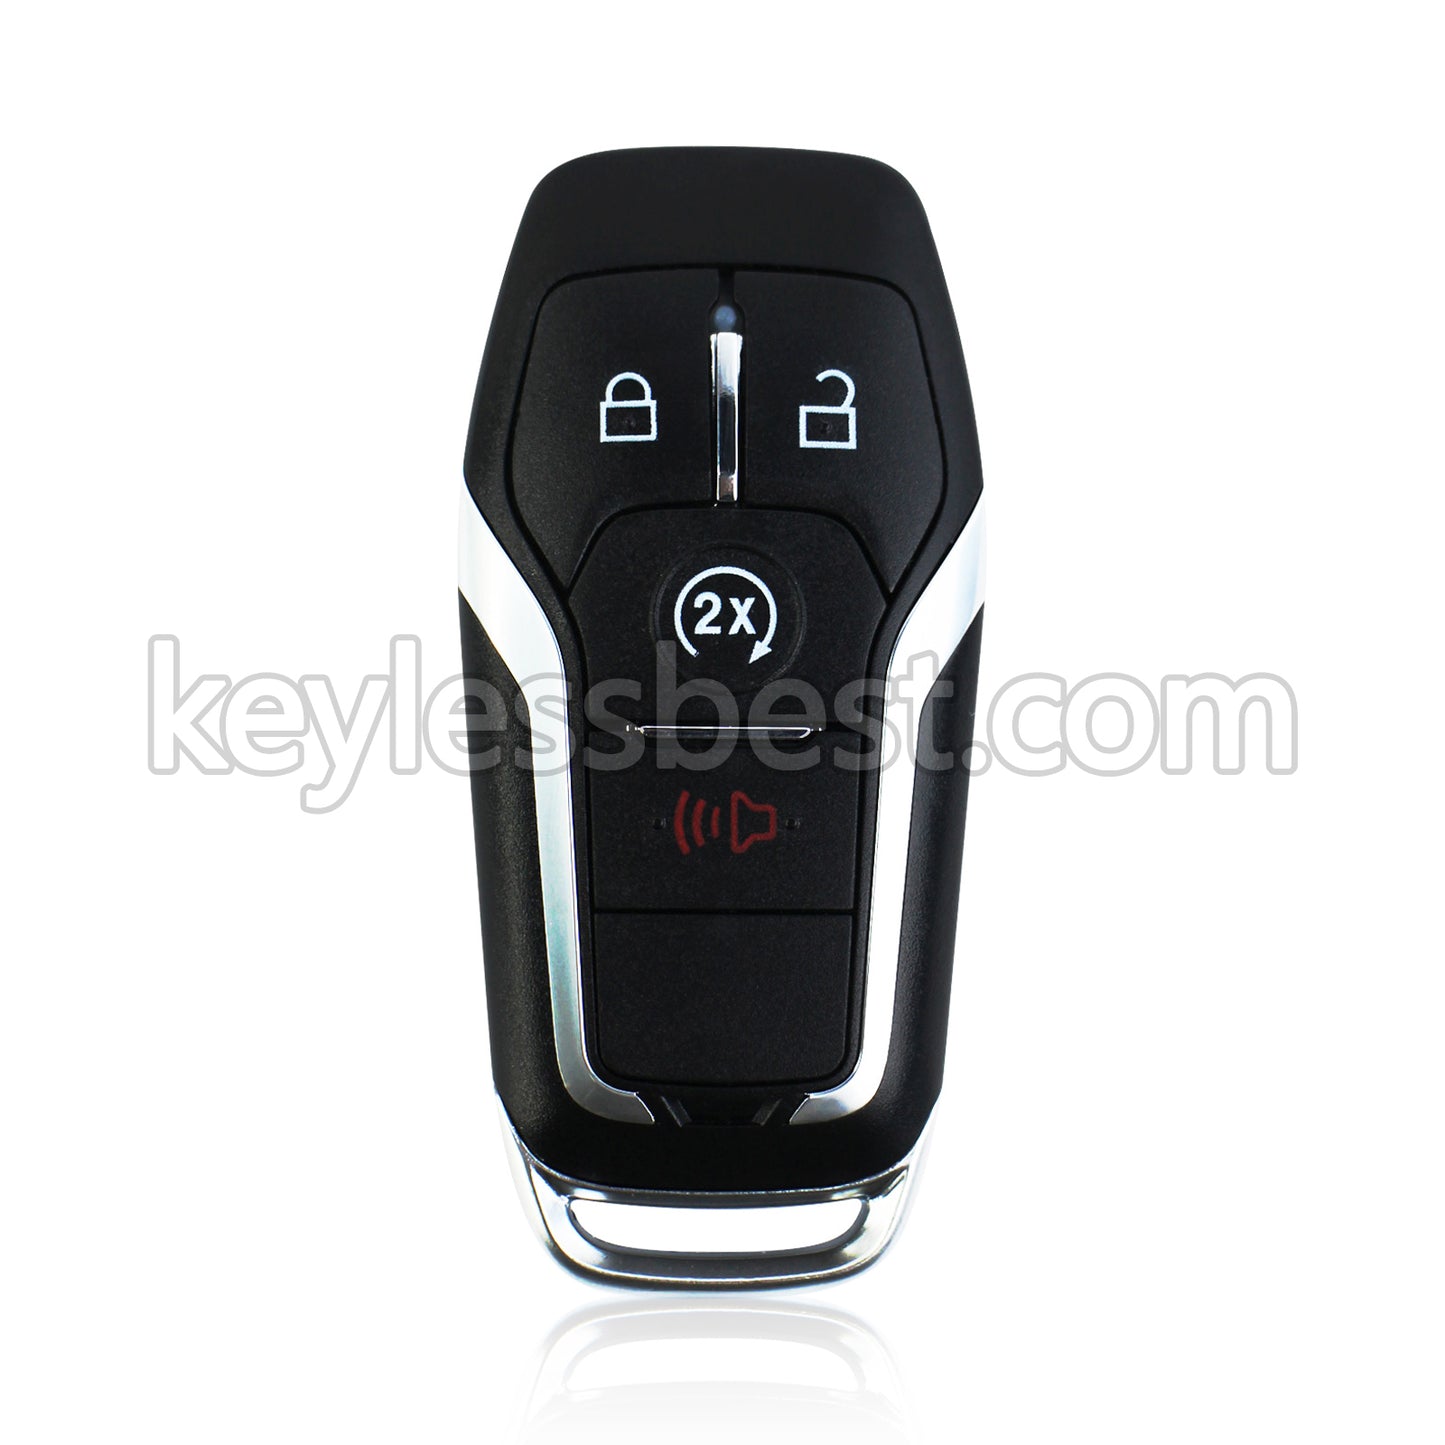 2016-2017 Ford Explorer / 5 Buttons Remote Key / M3N-A2C31243300 / 902MHz